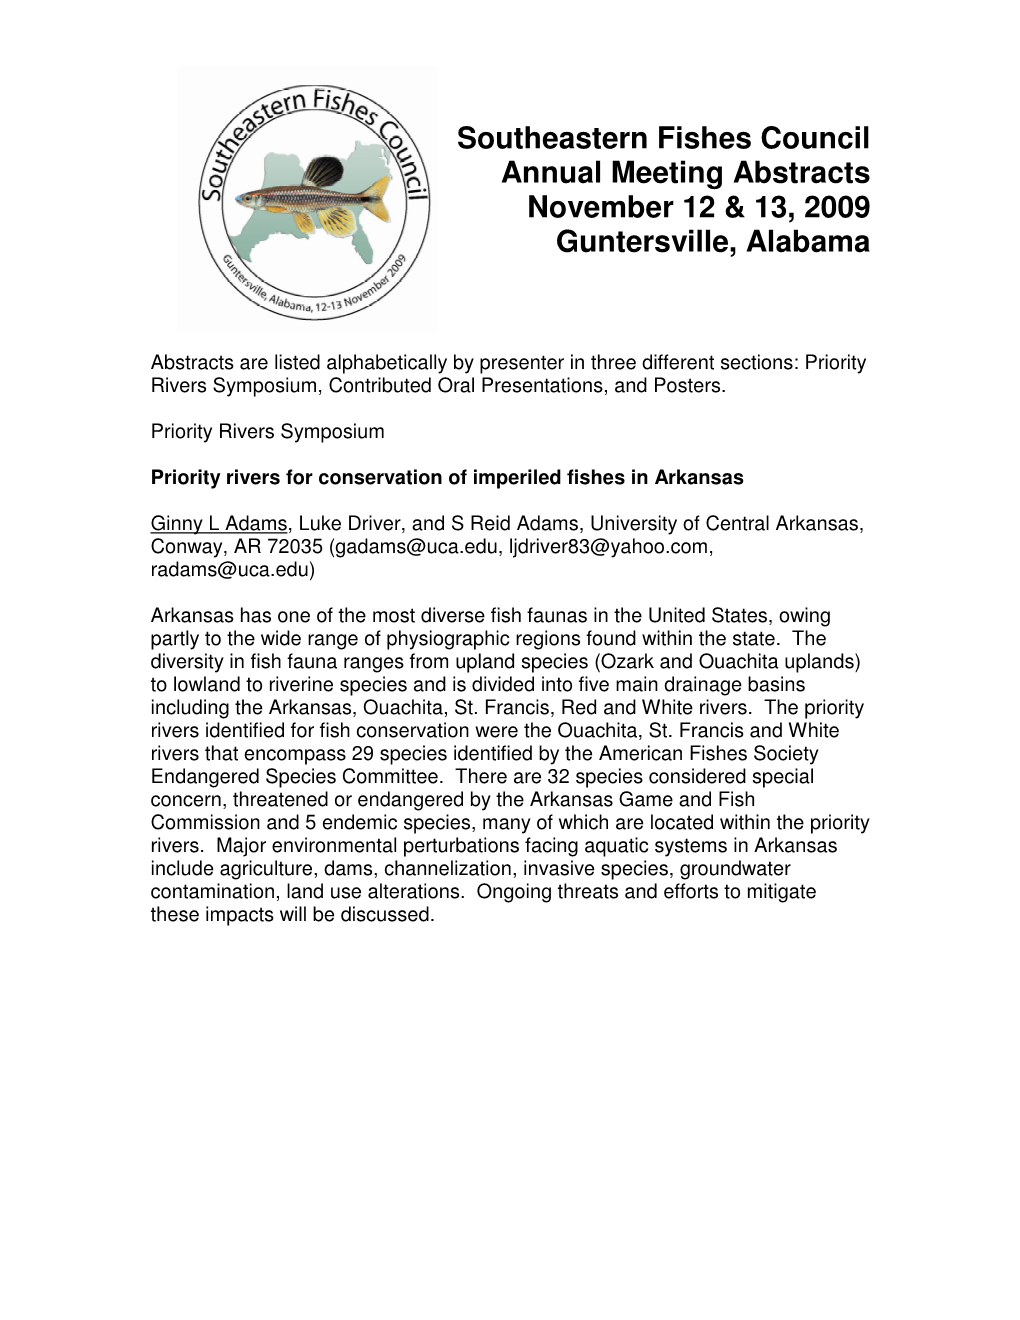 Southeastern Fishes Council Annual Meeting Abstracts November 12 & 13, 2009 Guntersville, Alabama